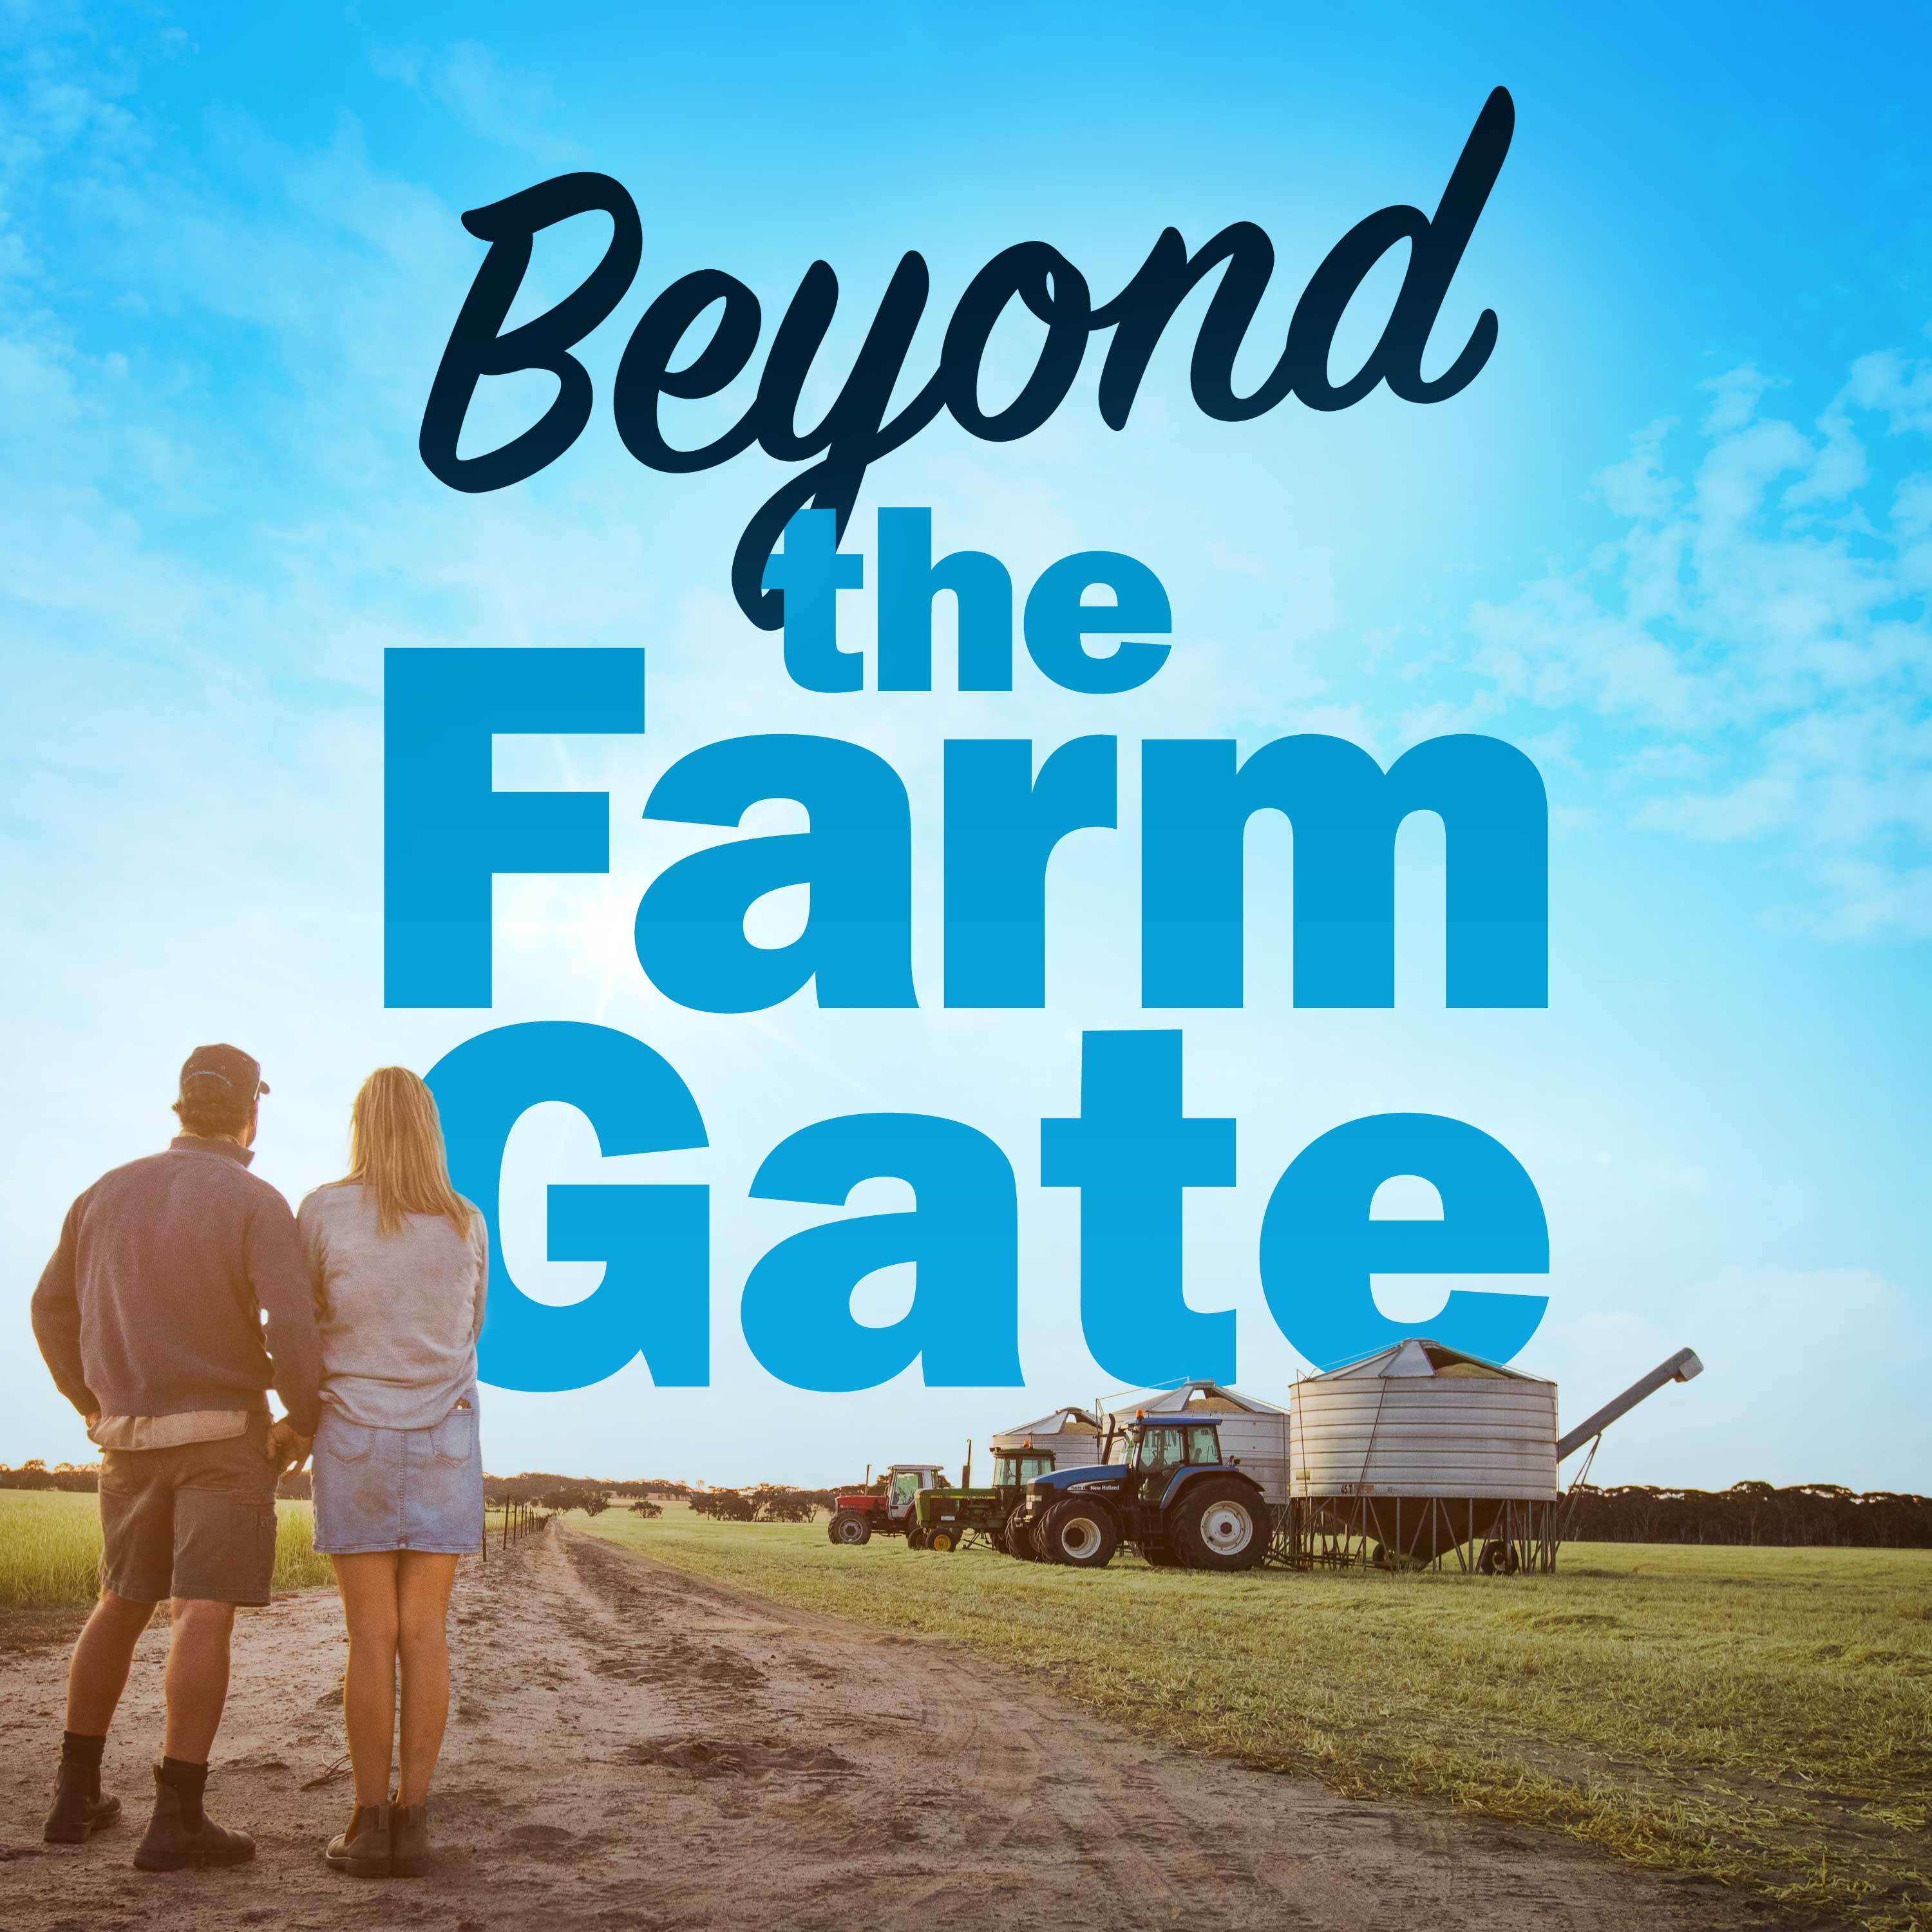 The power of resilience and embracing life in agriculture